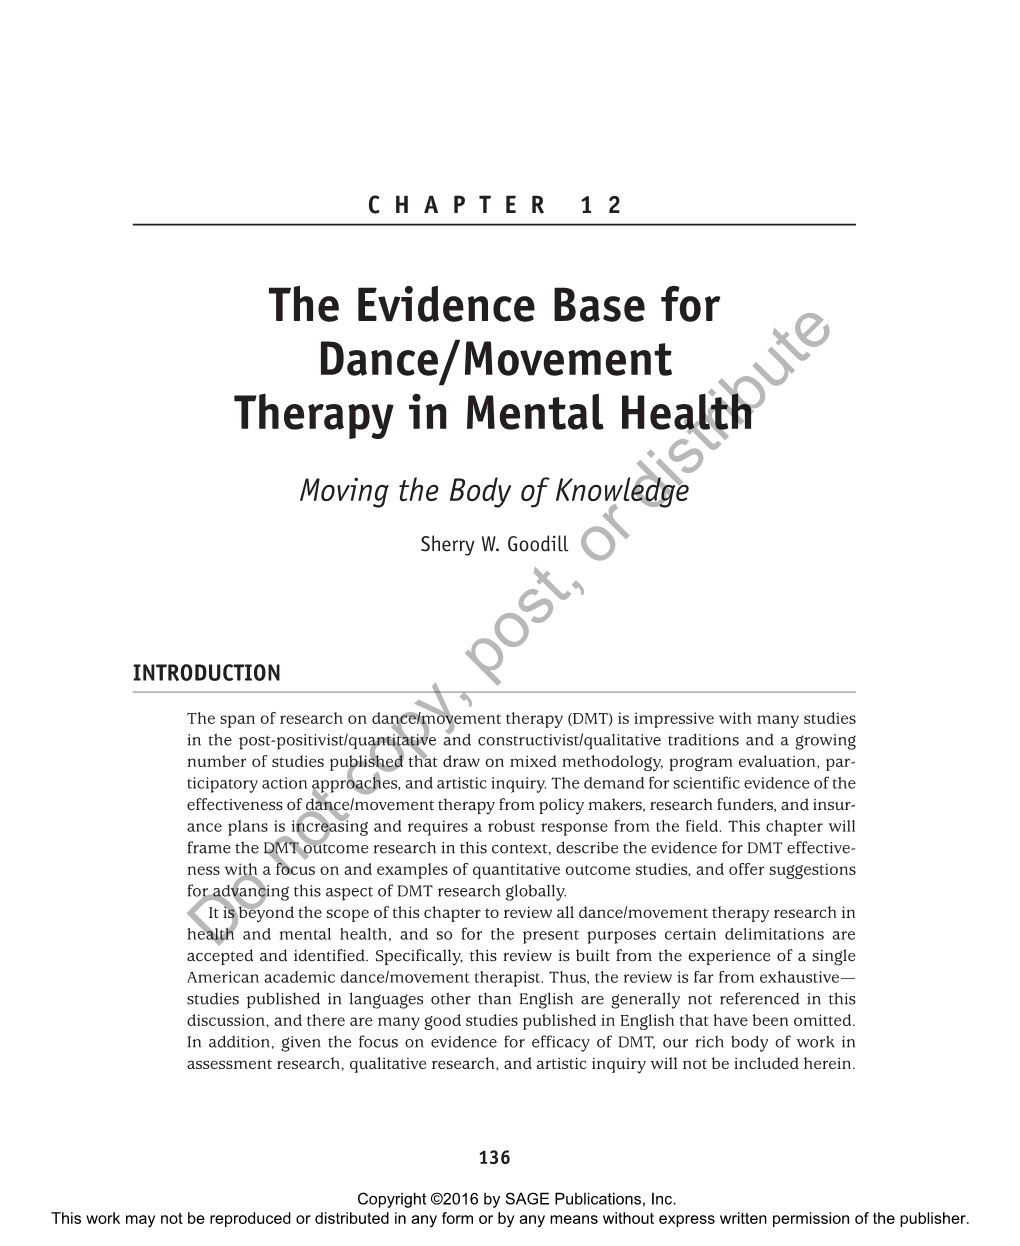 The Evidence Base for Dance/Movement Therapy in Mental Health Moving the Body of Knowledgedistribute Sherry W